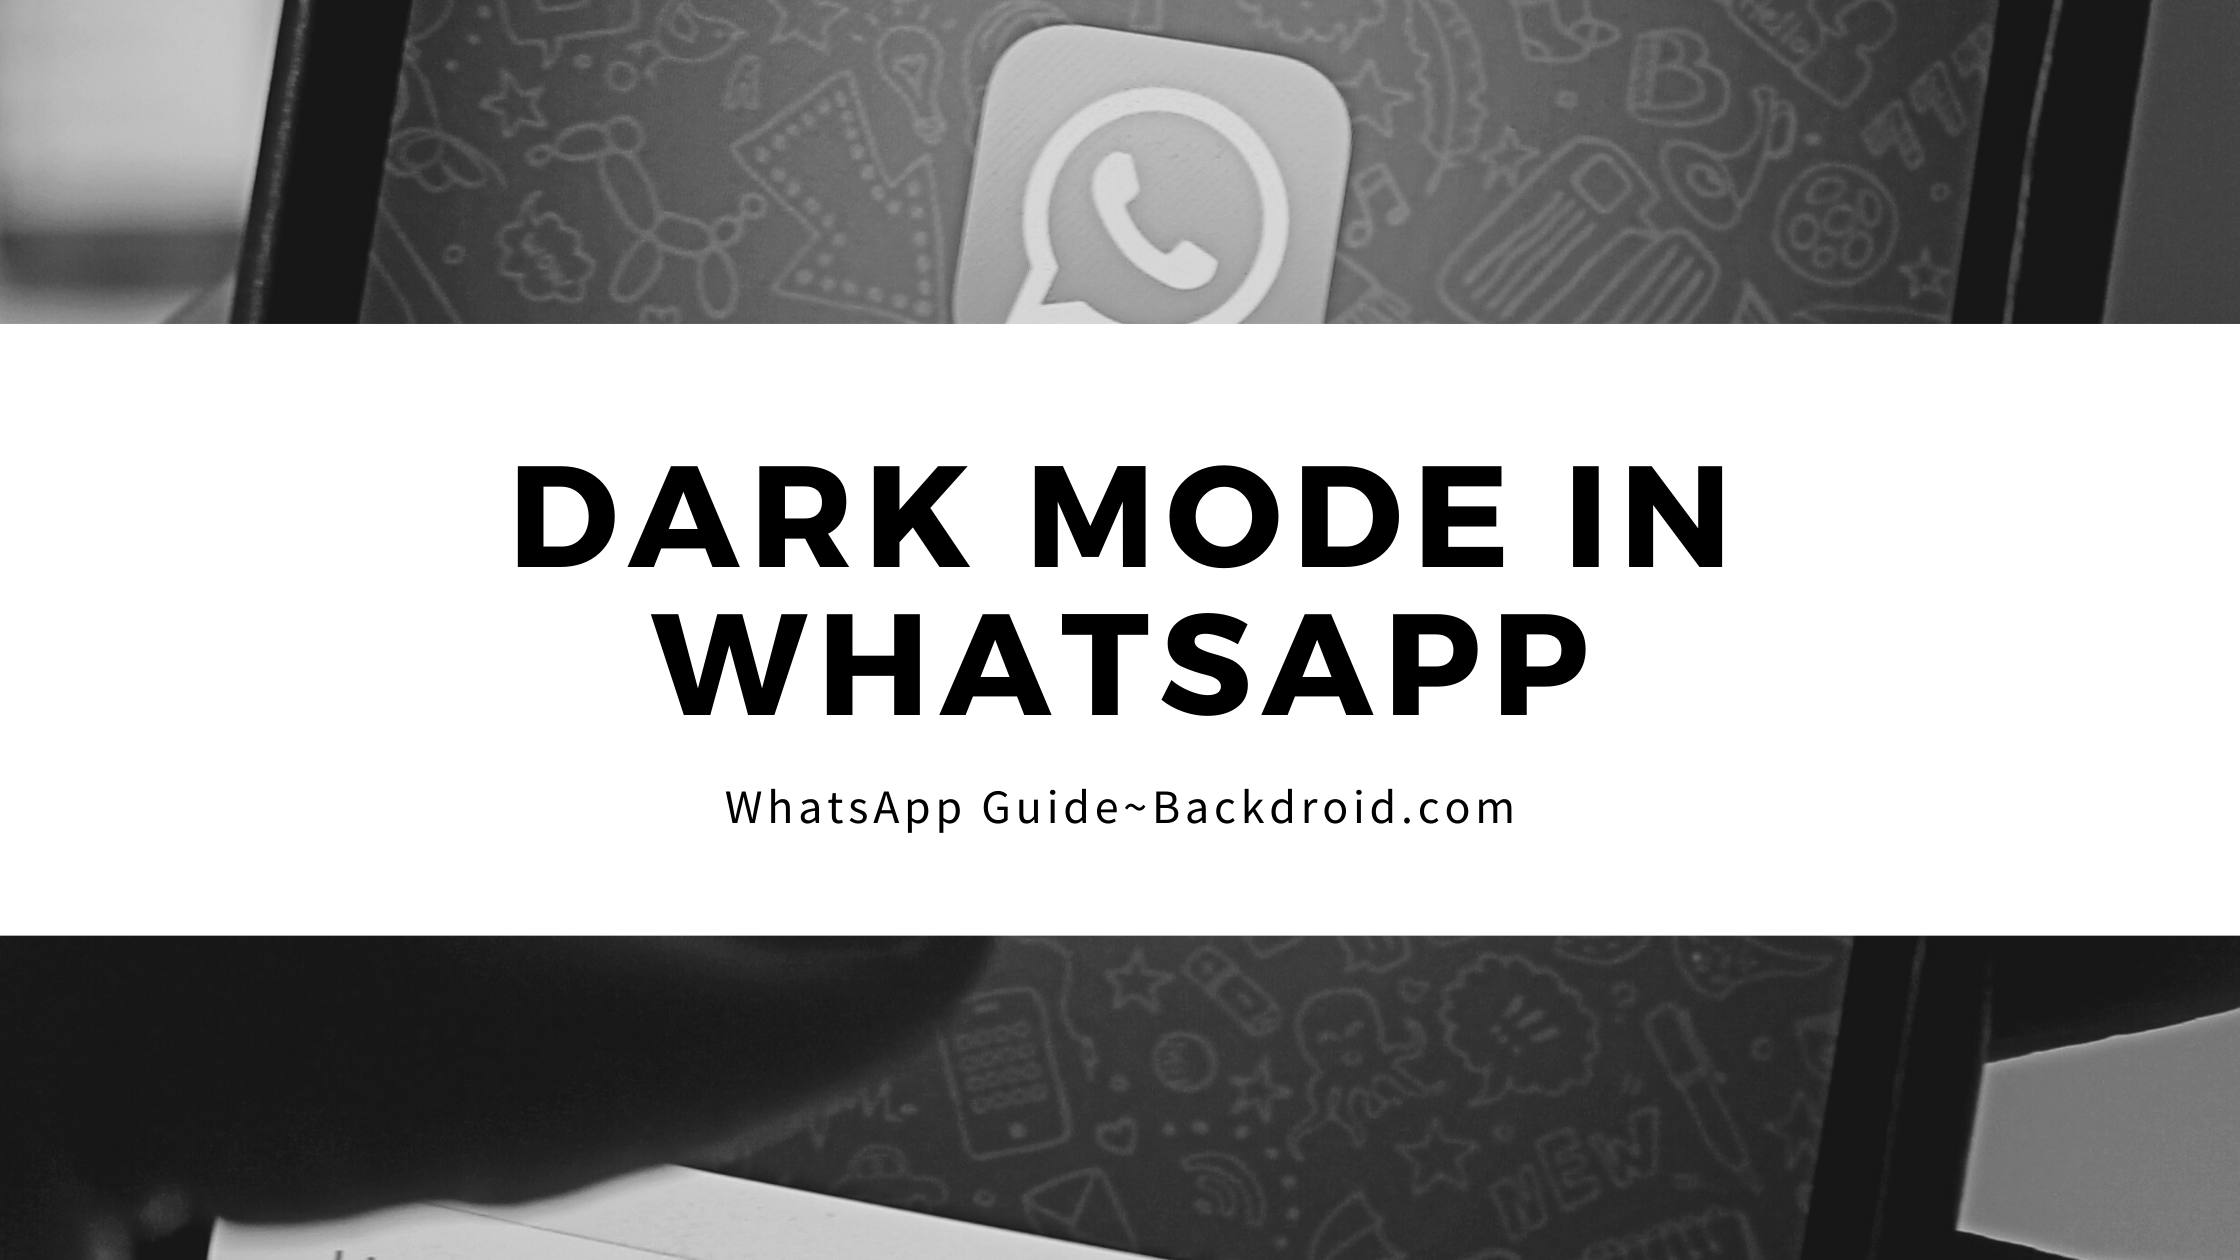 How to enable dark mode in whatsapp